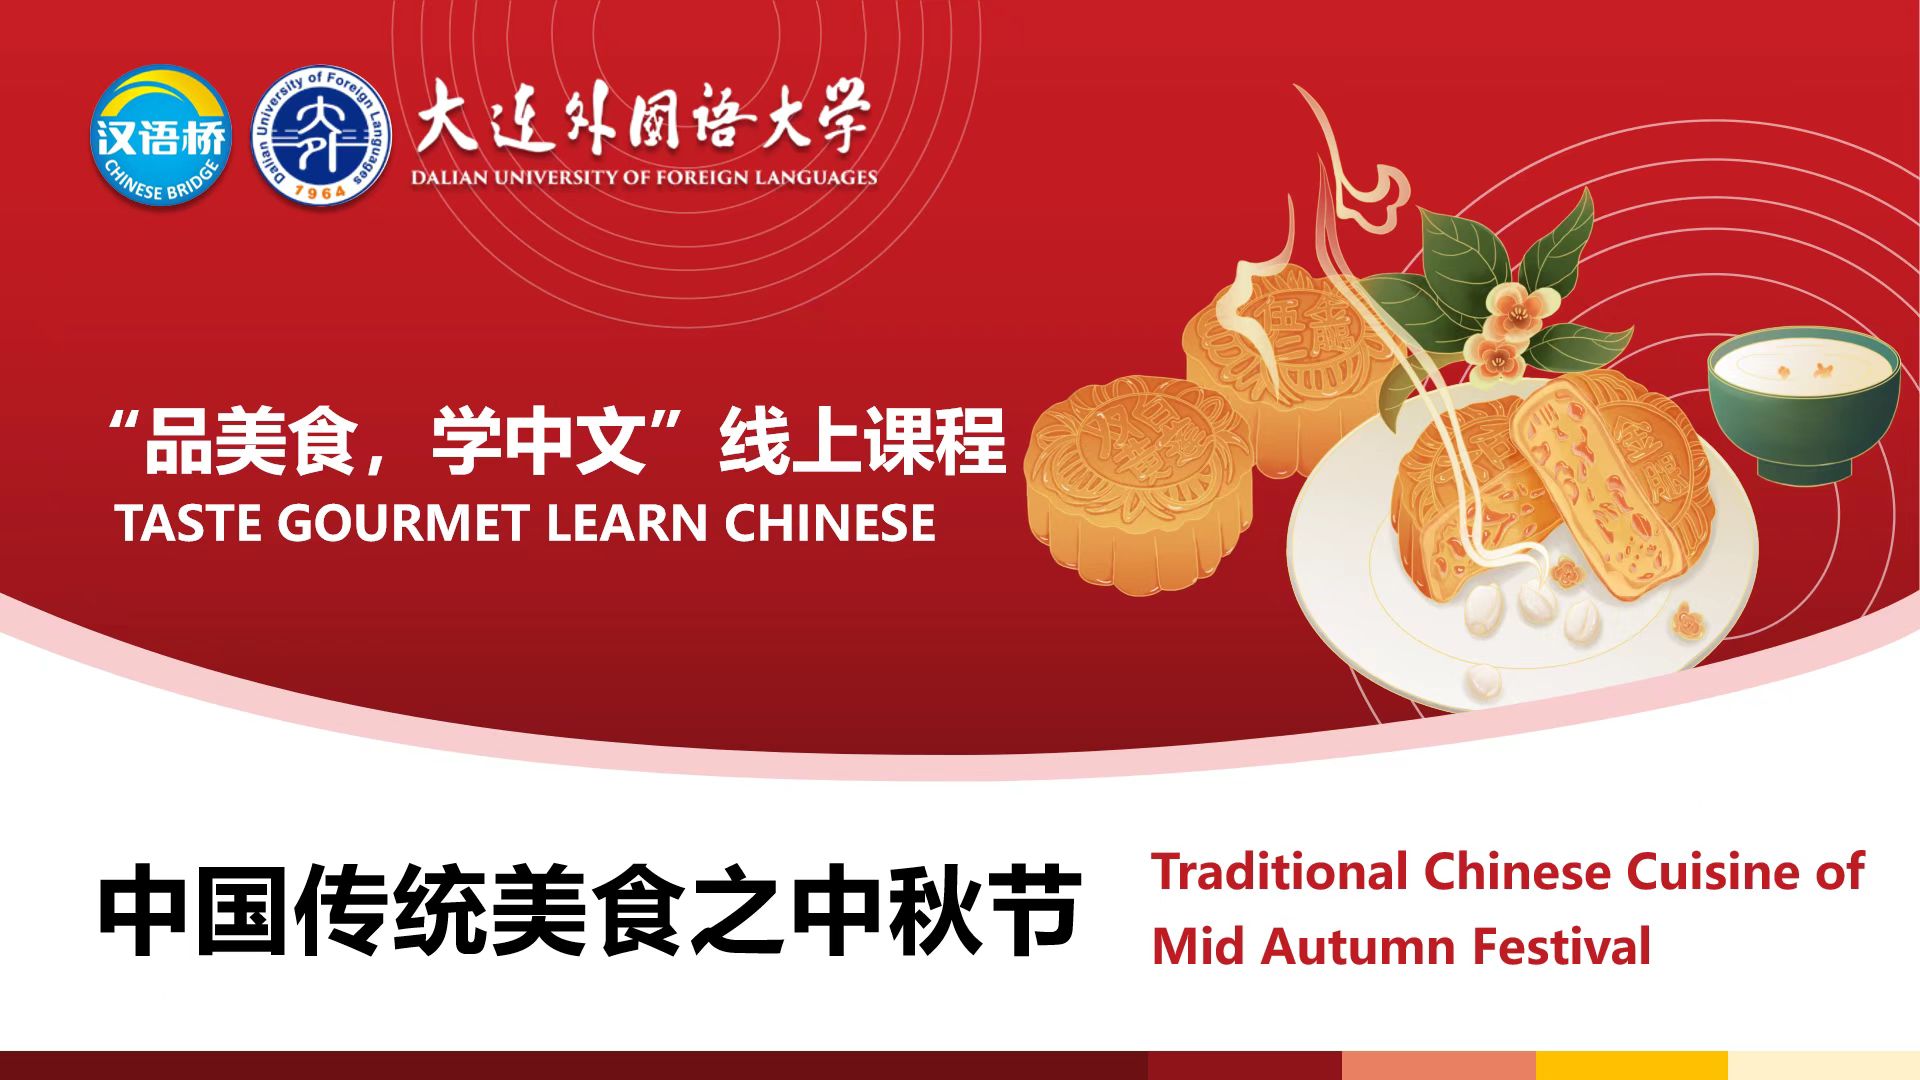 Traditional Chinese Cuisine of Mid Autumn Festival